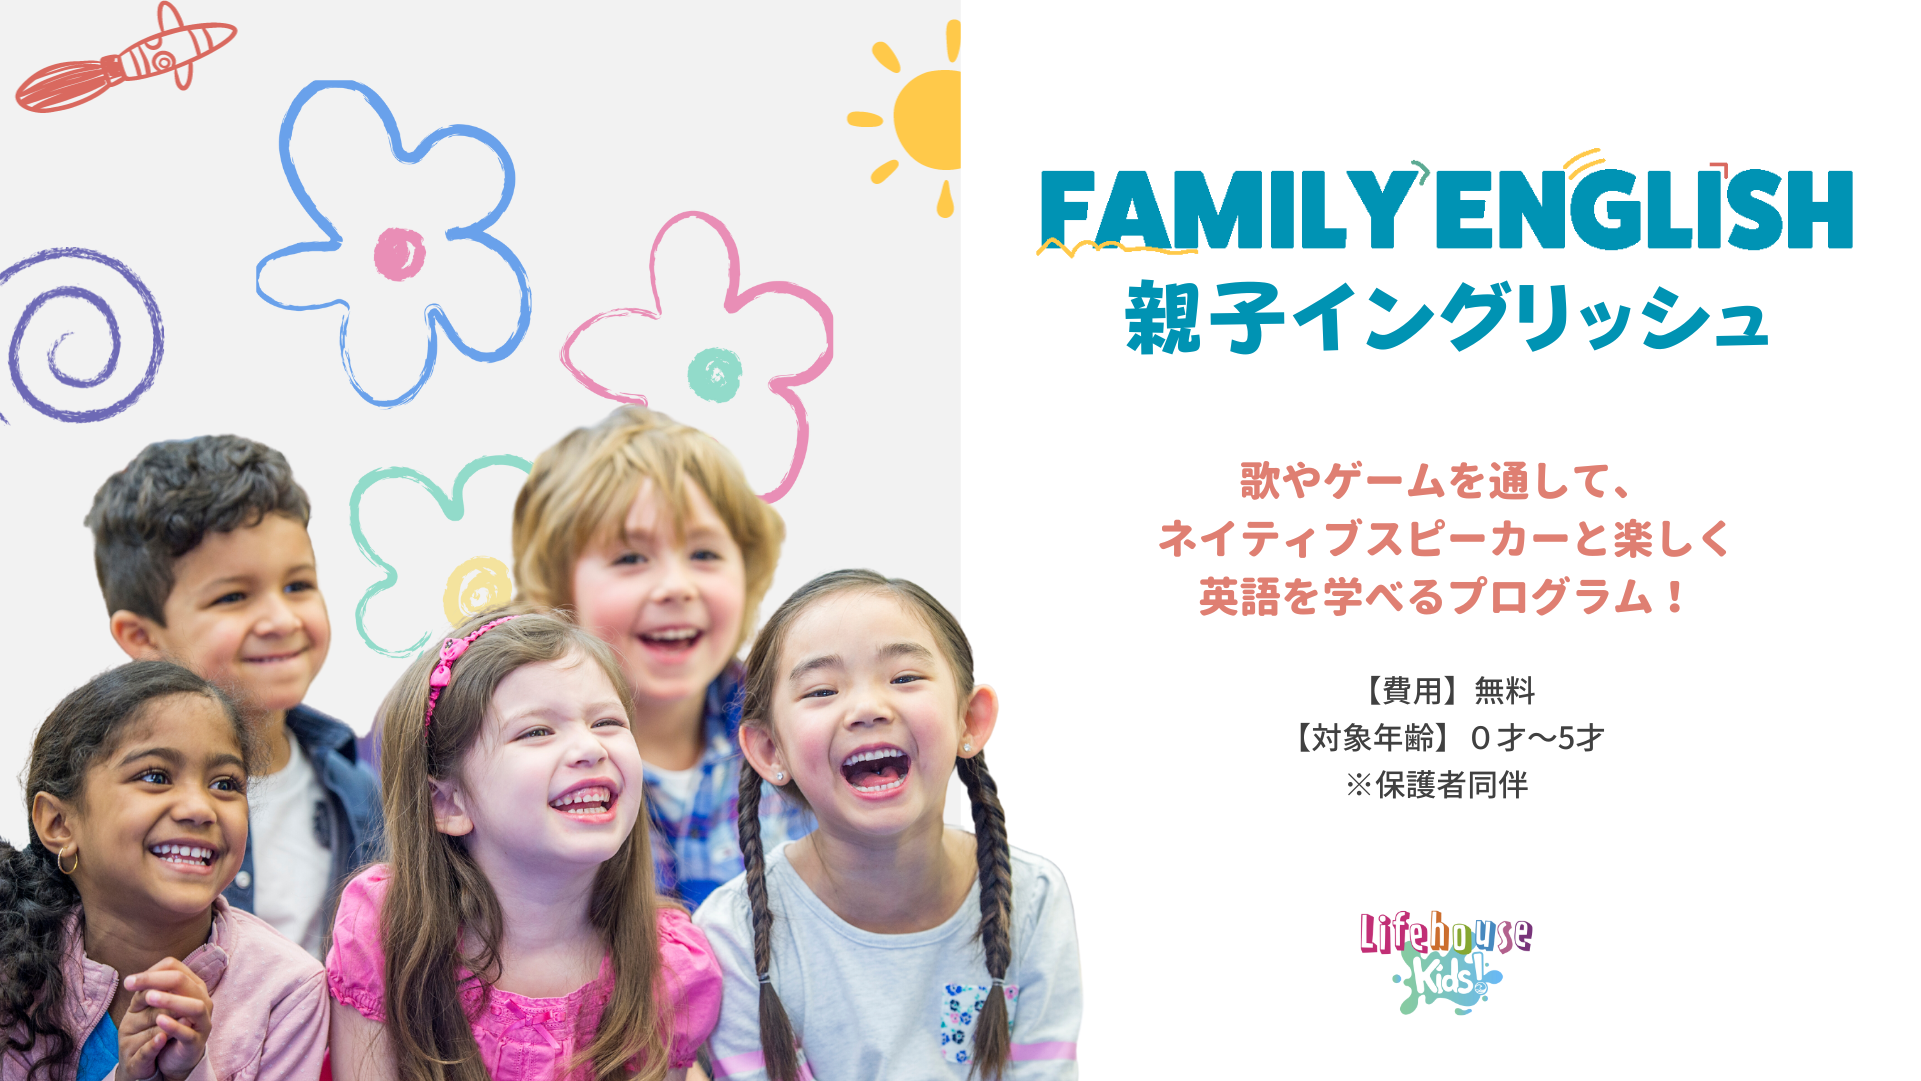 Featured image for “Family English”